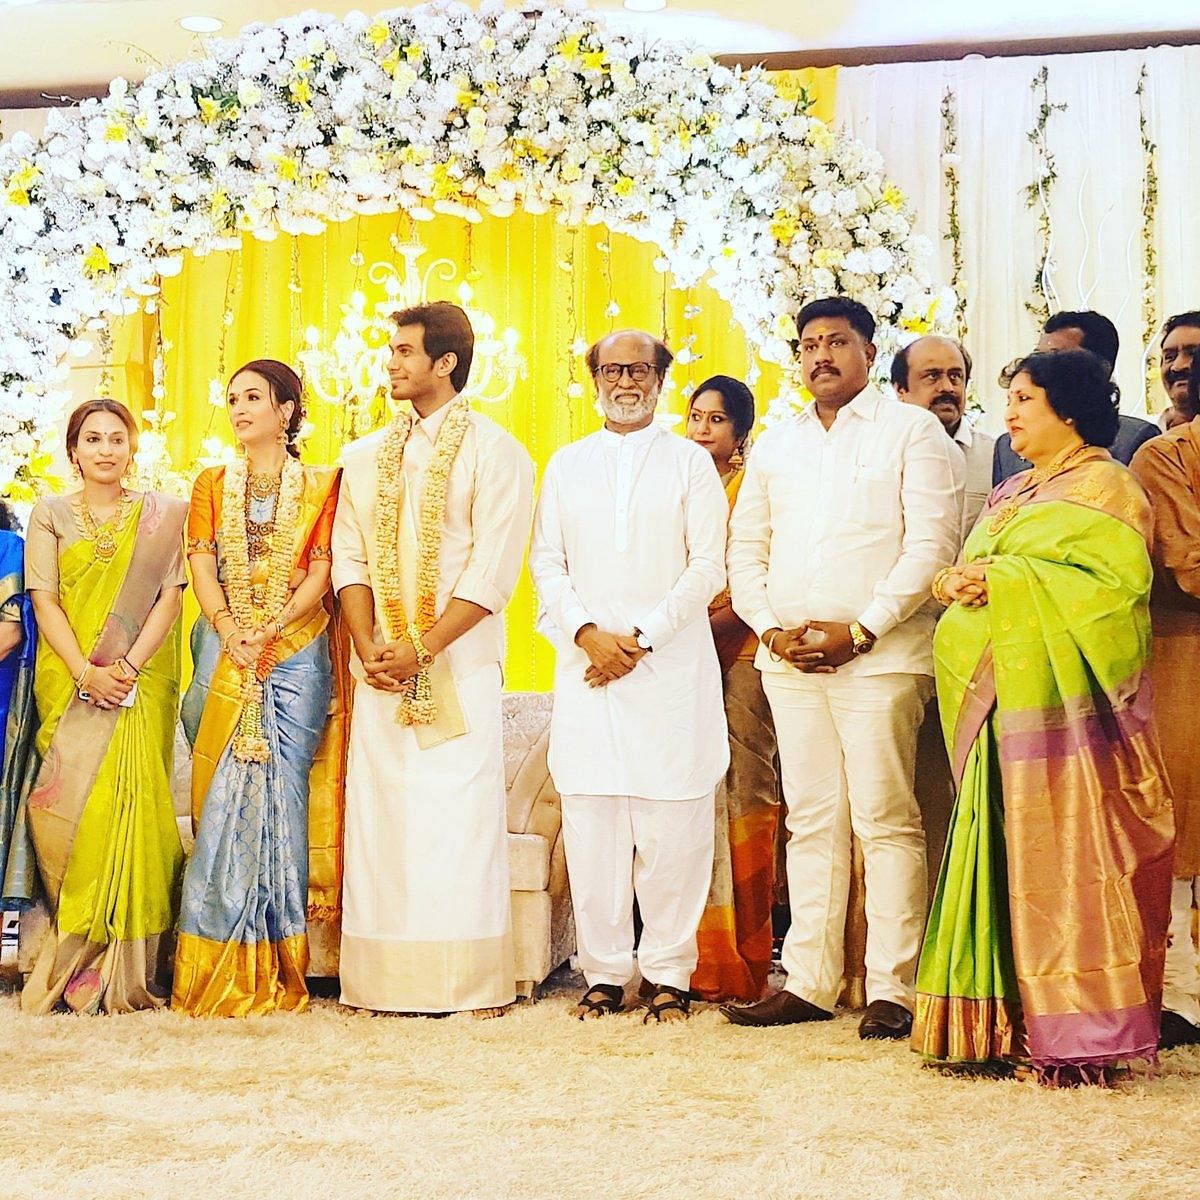 The pre-wedding reception was held at the Sri Raghavendra Kalyana Mandapam, owned by Rajinikanth, on Friday – the couple will tie the knot at a gala wedding ceremony on Monday morning at a five-star hotel in the city.